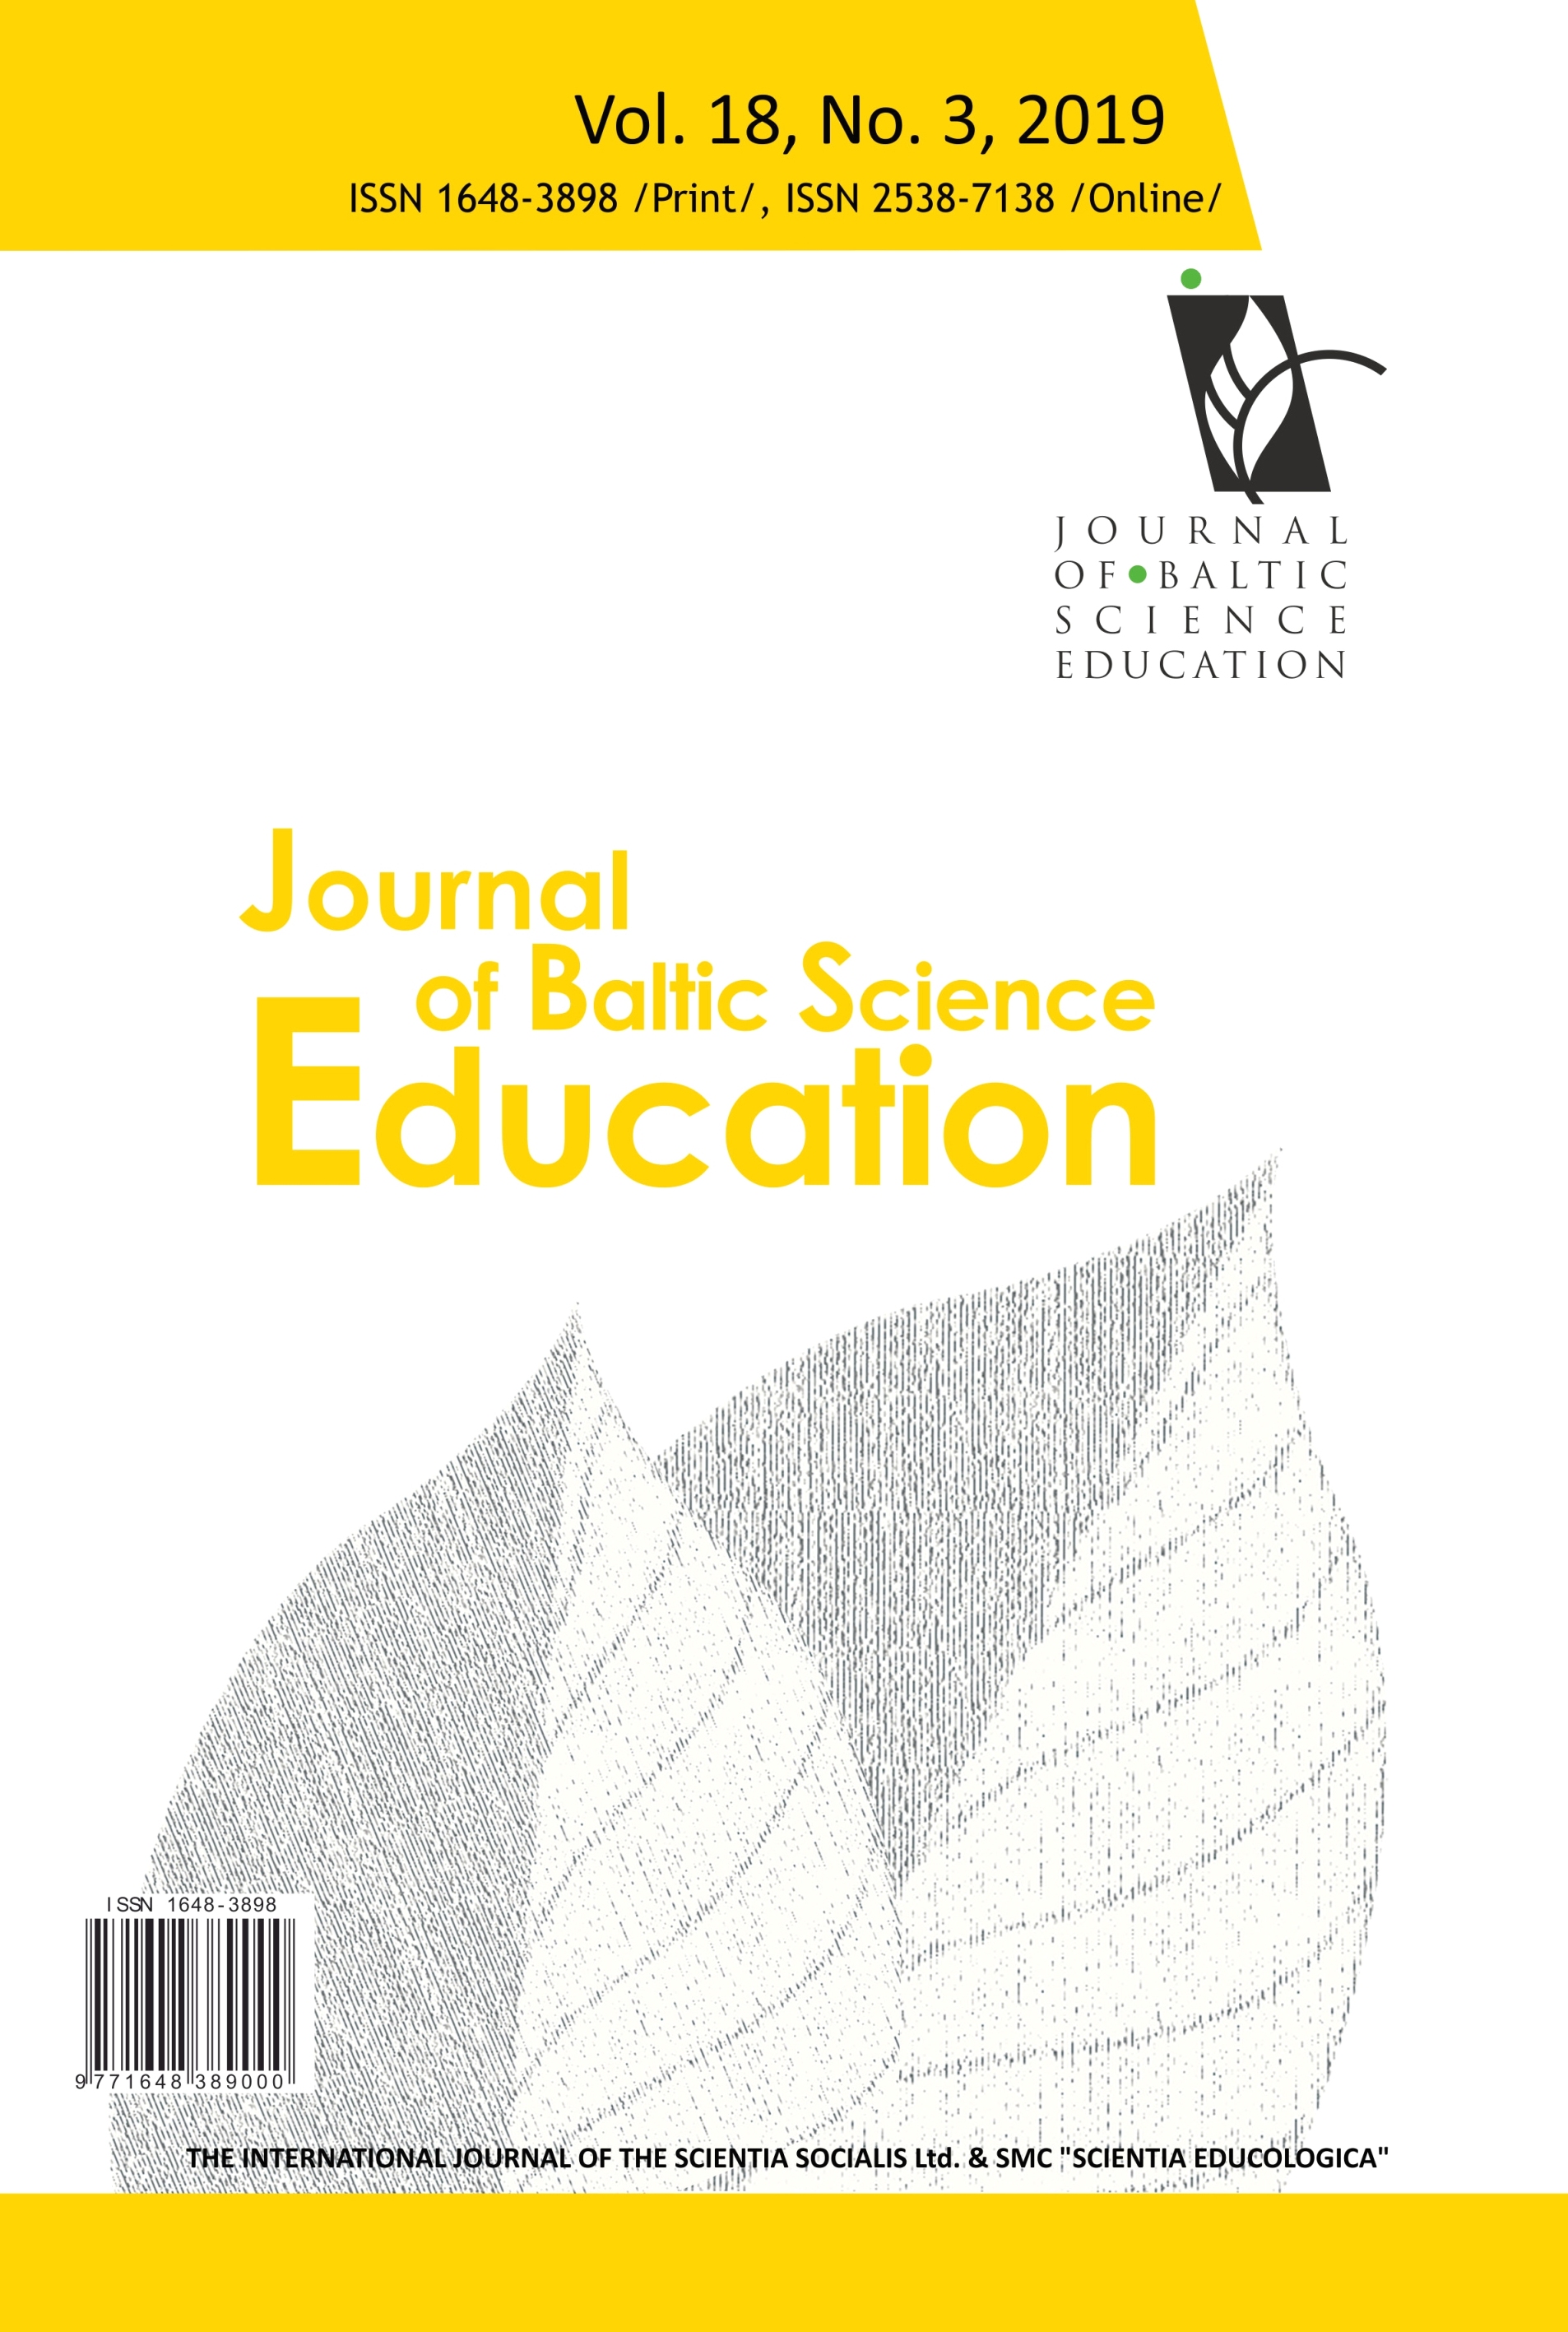 THE EFFECT OF COMPUTER-AIDED 3D MODELING ACTIVITIES ON PRE-SERVICE TEACHERS’ SPATIAL ABILITIES AND ATTITUDES TOWARDS 3D MODELING